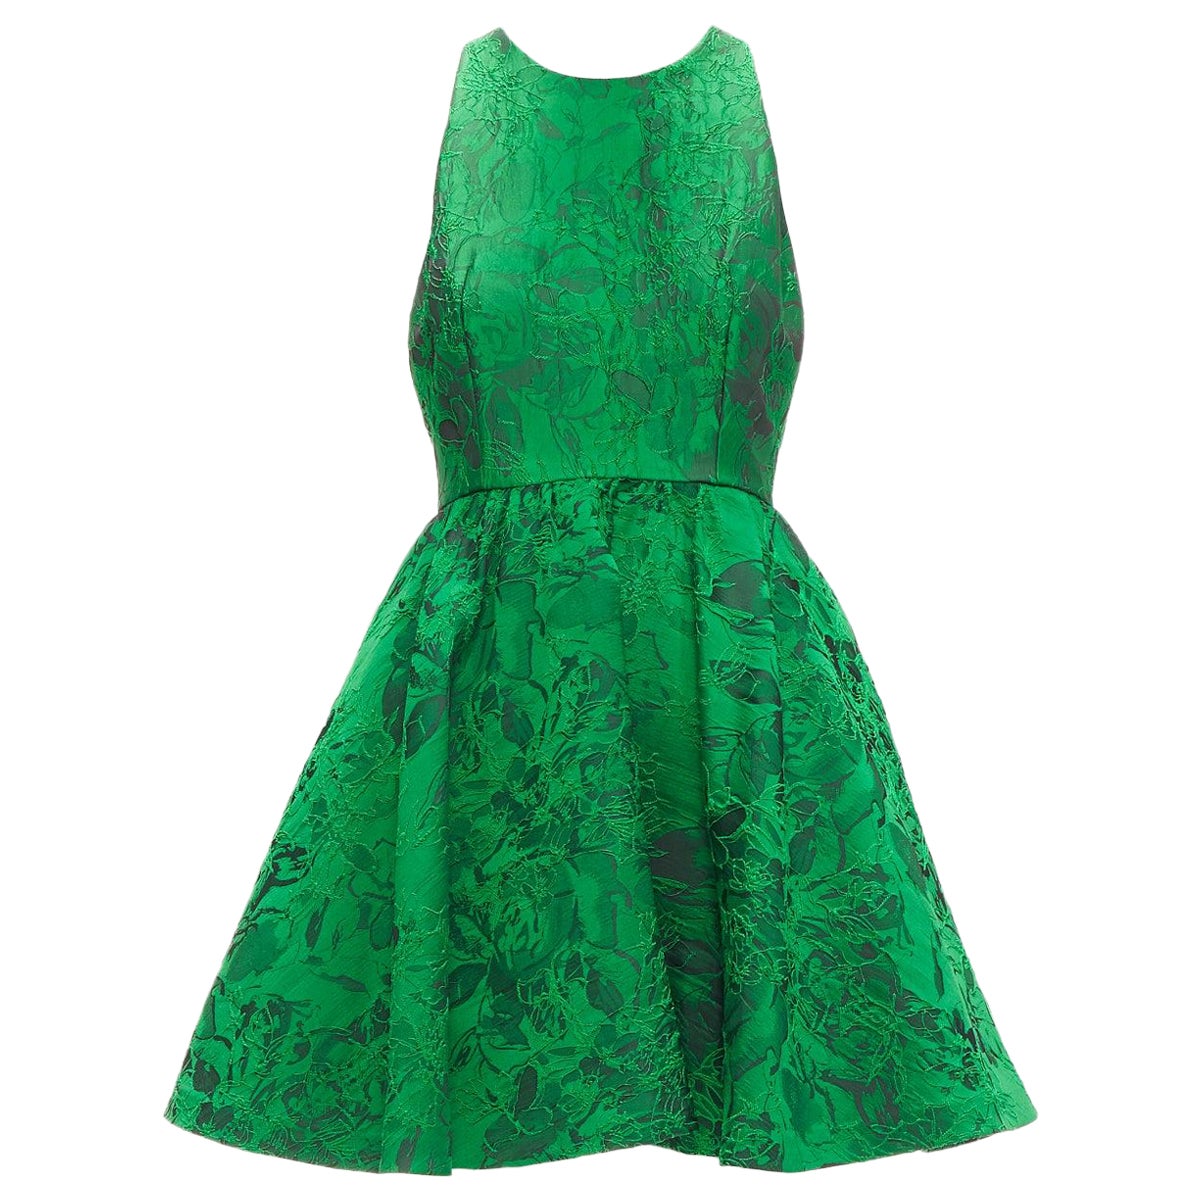 ALICE OLIVIA Tevin green lace jacquard sleeveless flared cocktail dress US0 XS For Sale